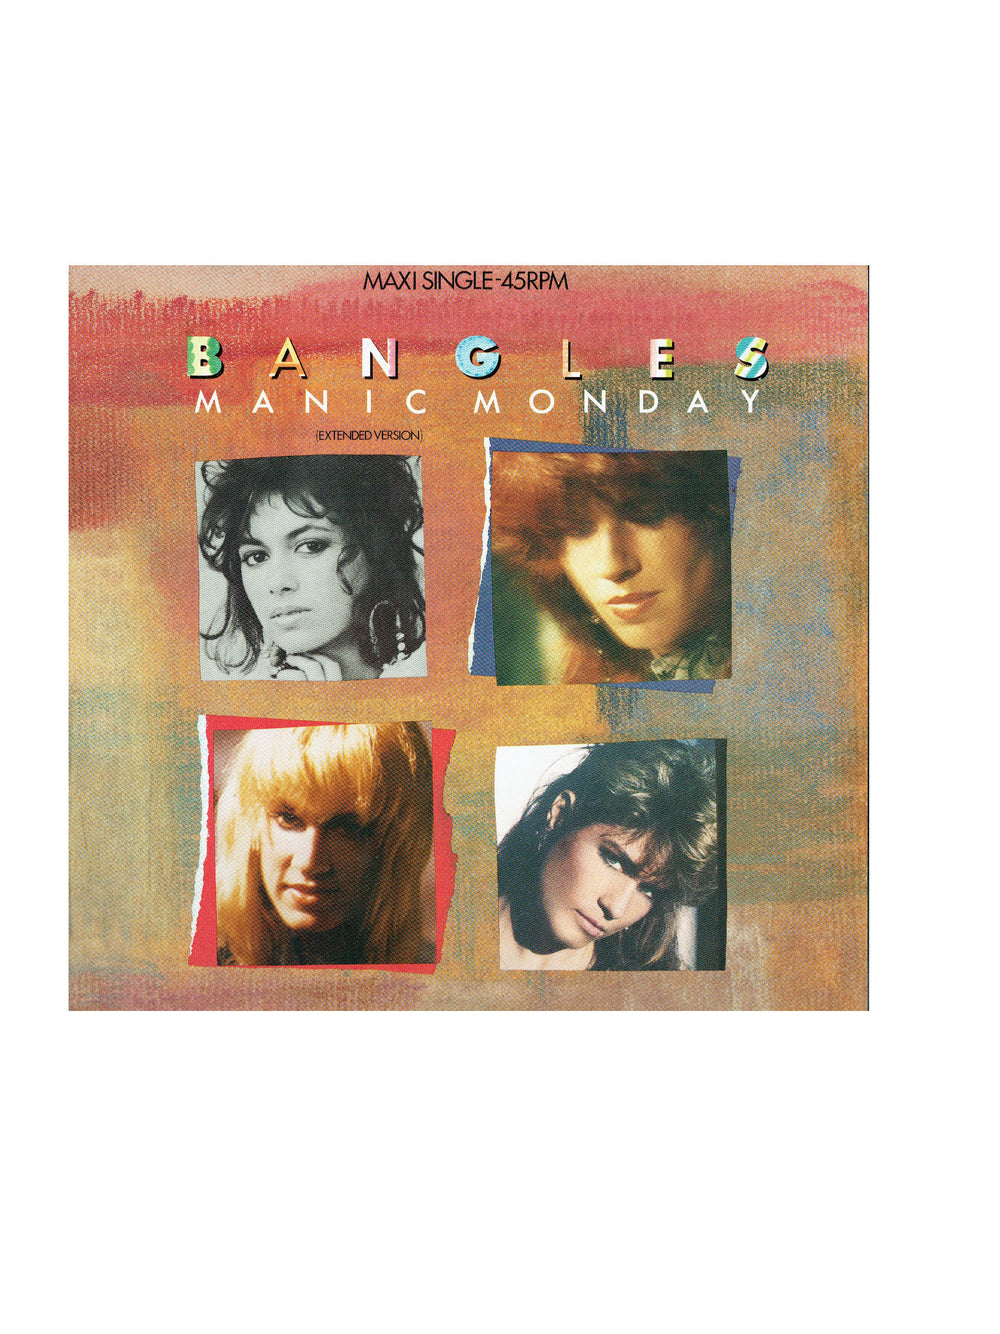 Prince – Bangles The Manic Monday 12 Inch Vinyl Single EU Release Written By Prince AS